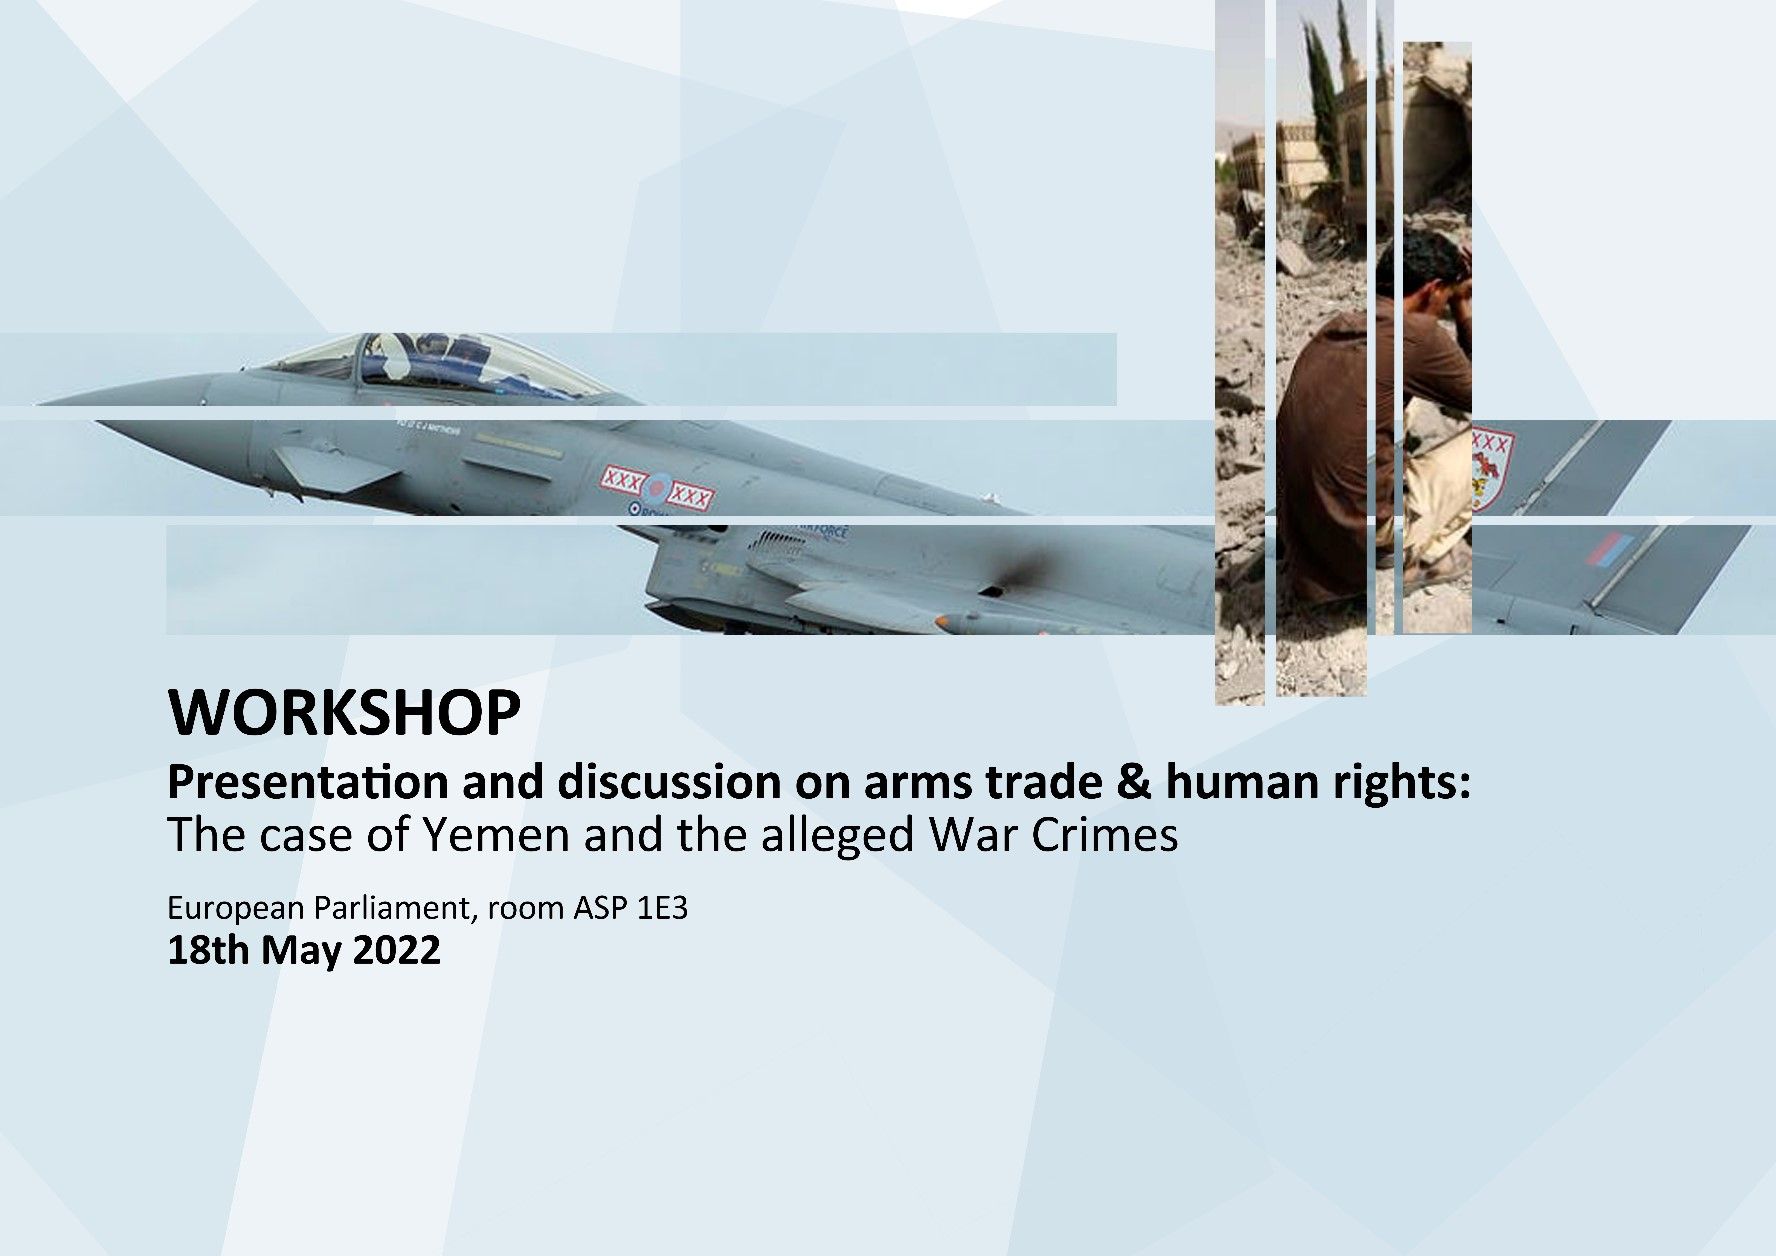 Workshop - Presentation and discussion on arms trade & human rights: The case of Yemen and the alleged War Crimes